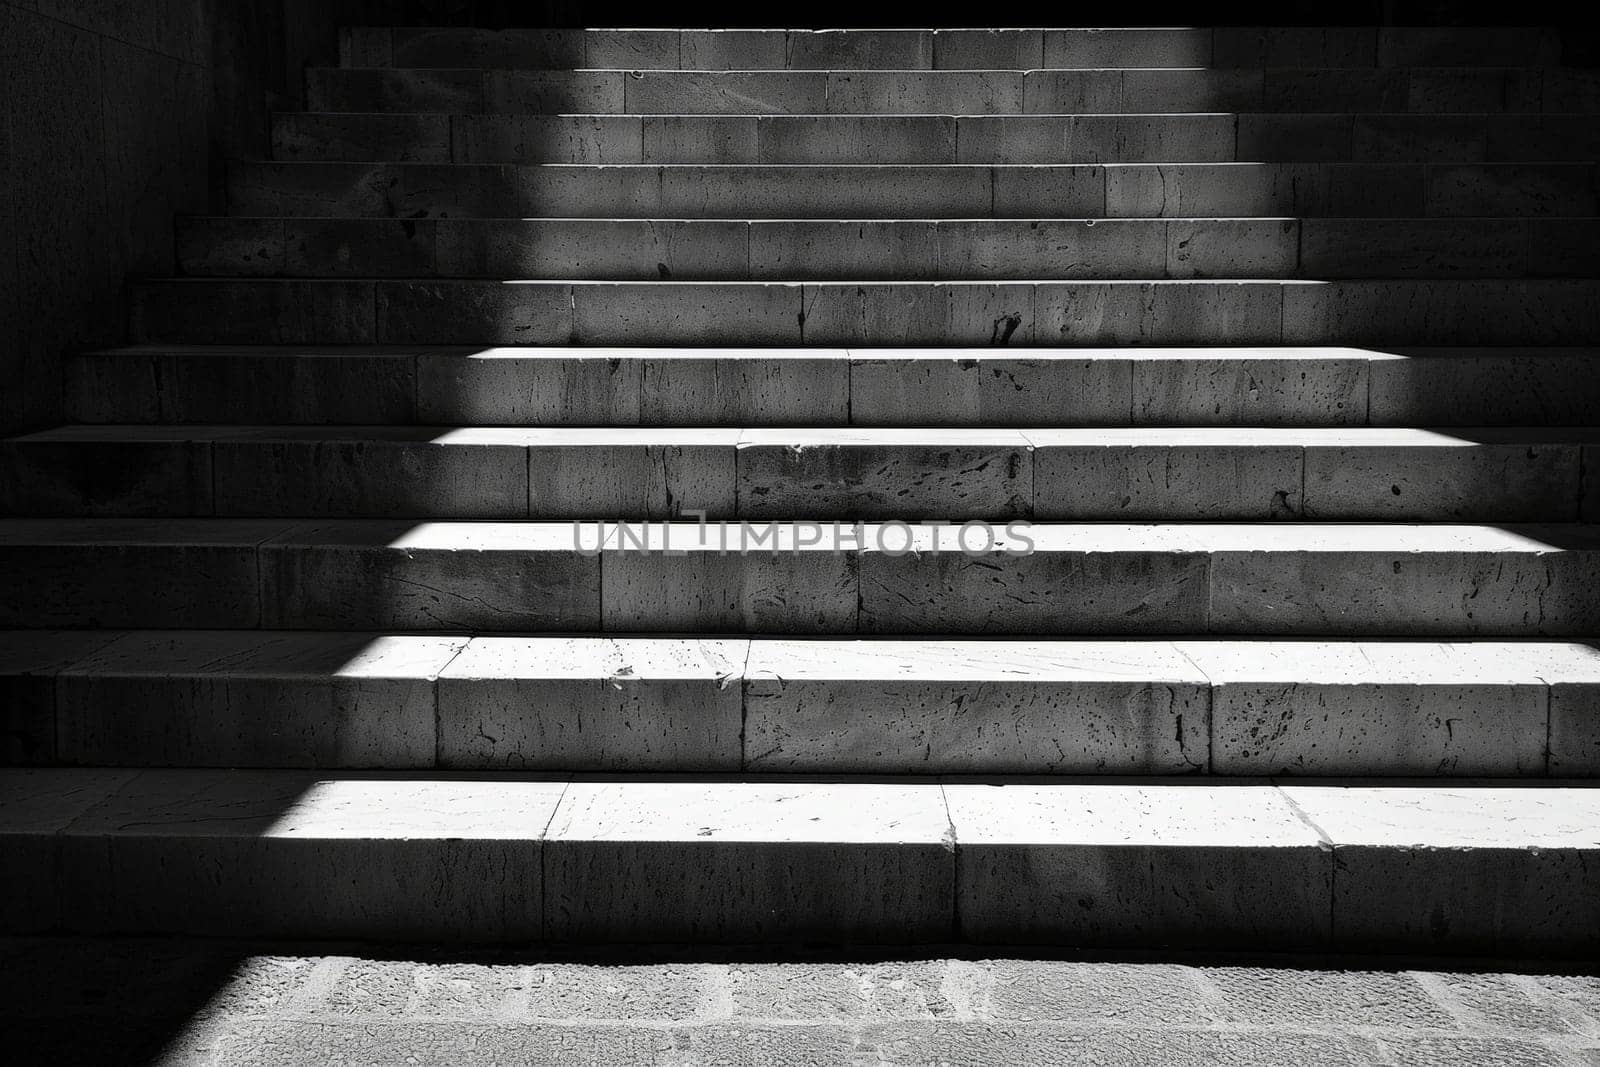 Lighting effects of staircases in public buildings, abstract simple stairs by nijieimu